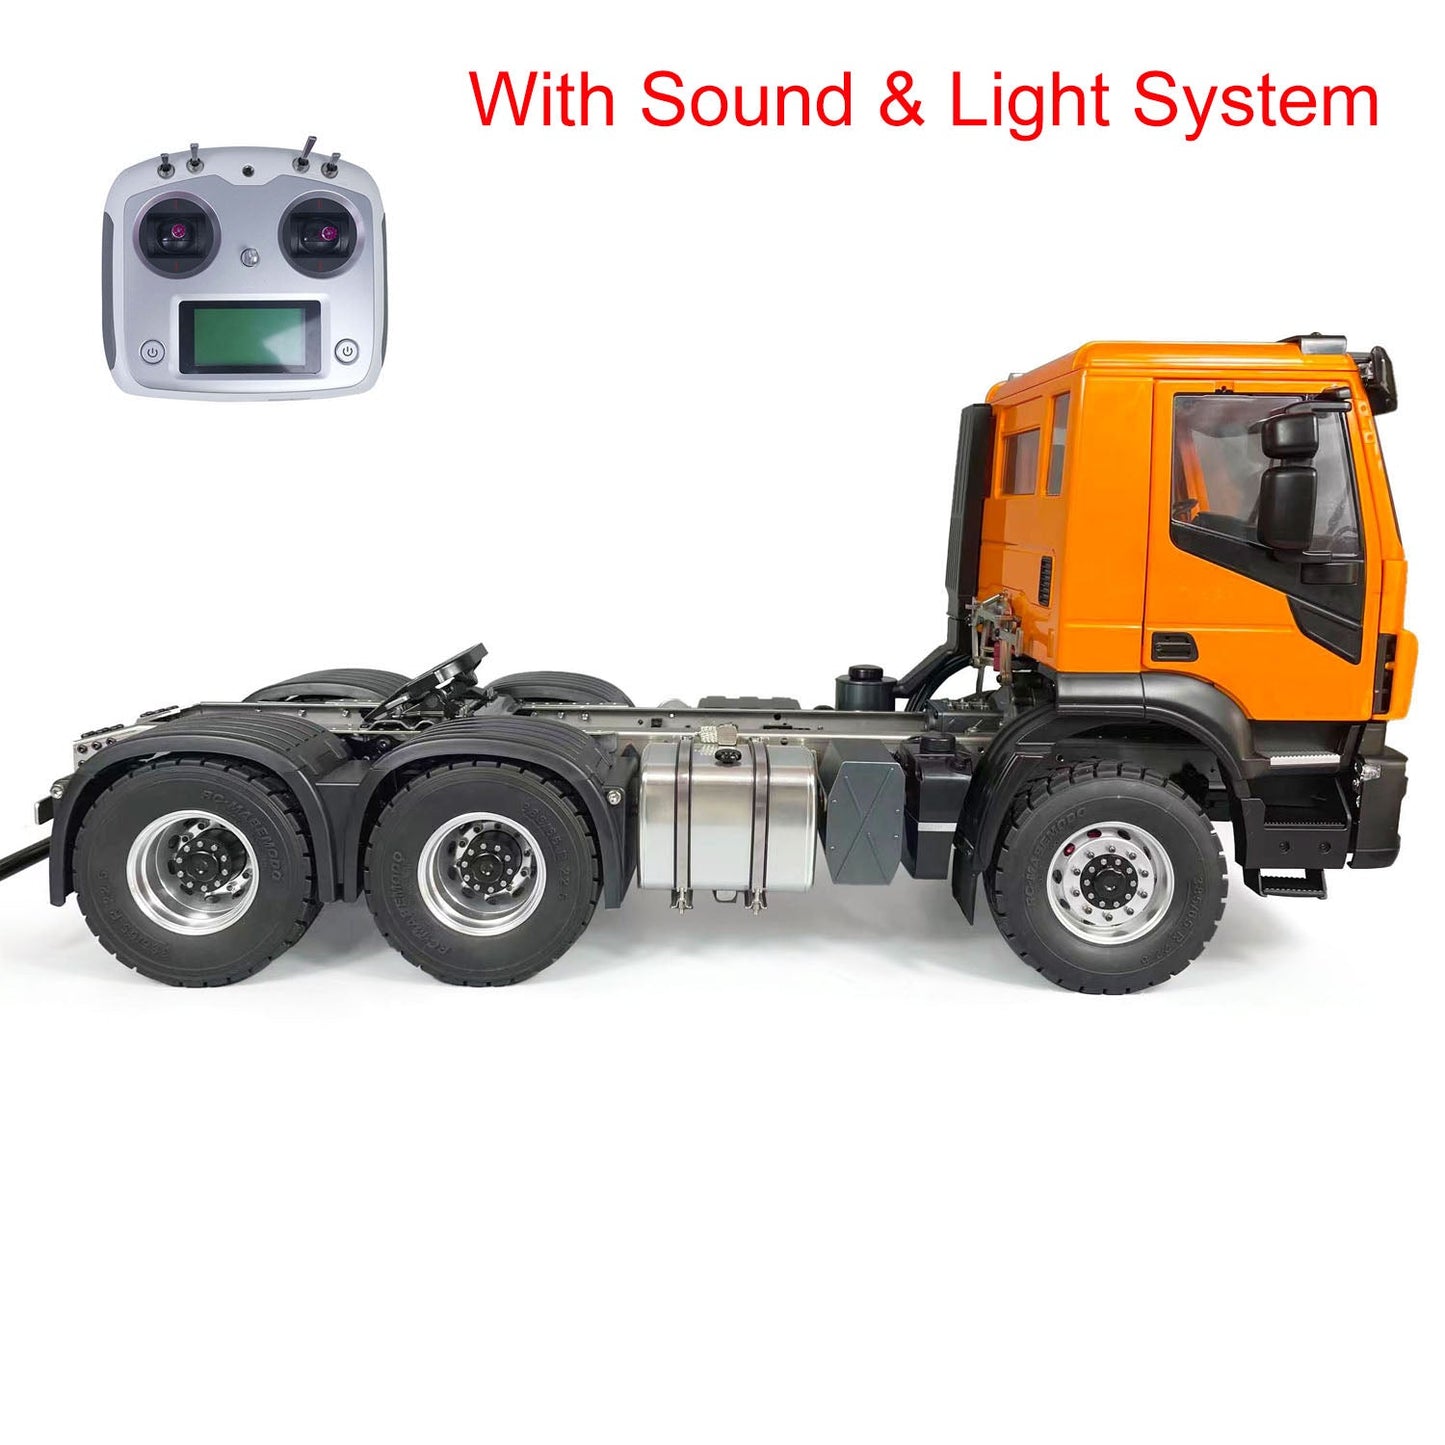 1/14 6x4 RC Tractor Trucks Remote Controlled 2-Speed Transmission Toy Car Metal Chassis PNP Version DIY Hobby Model